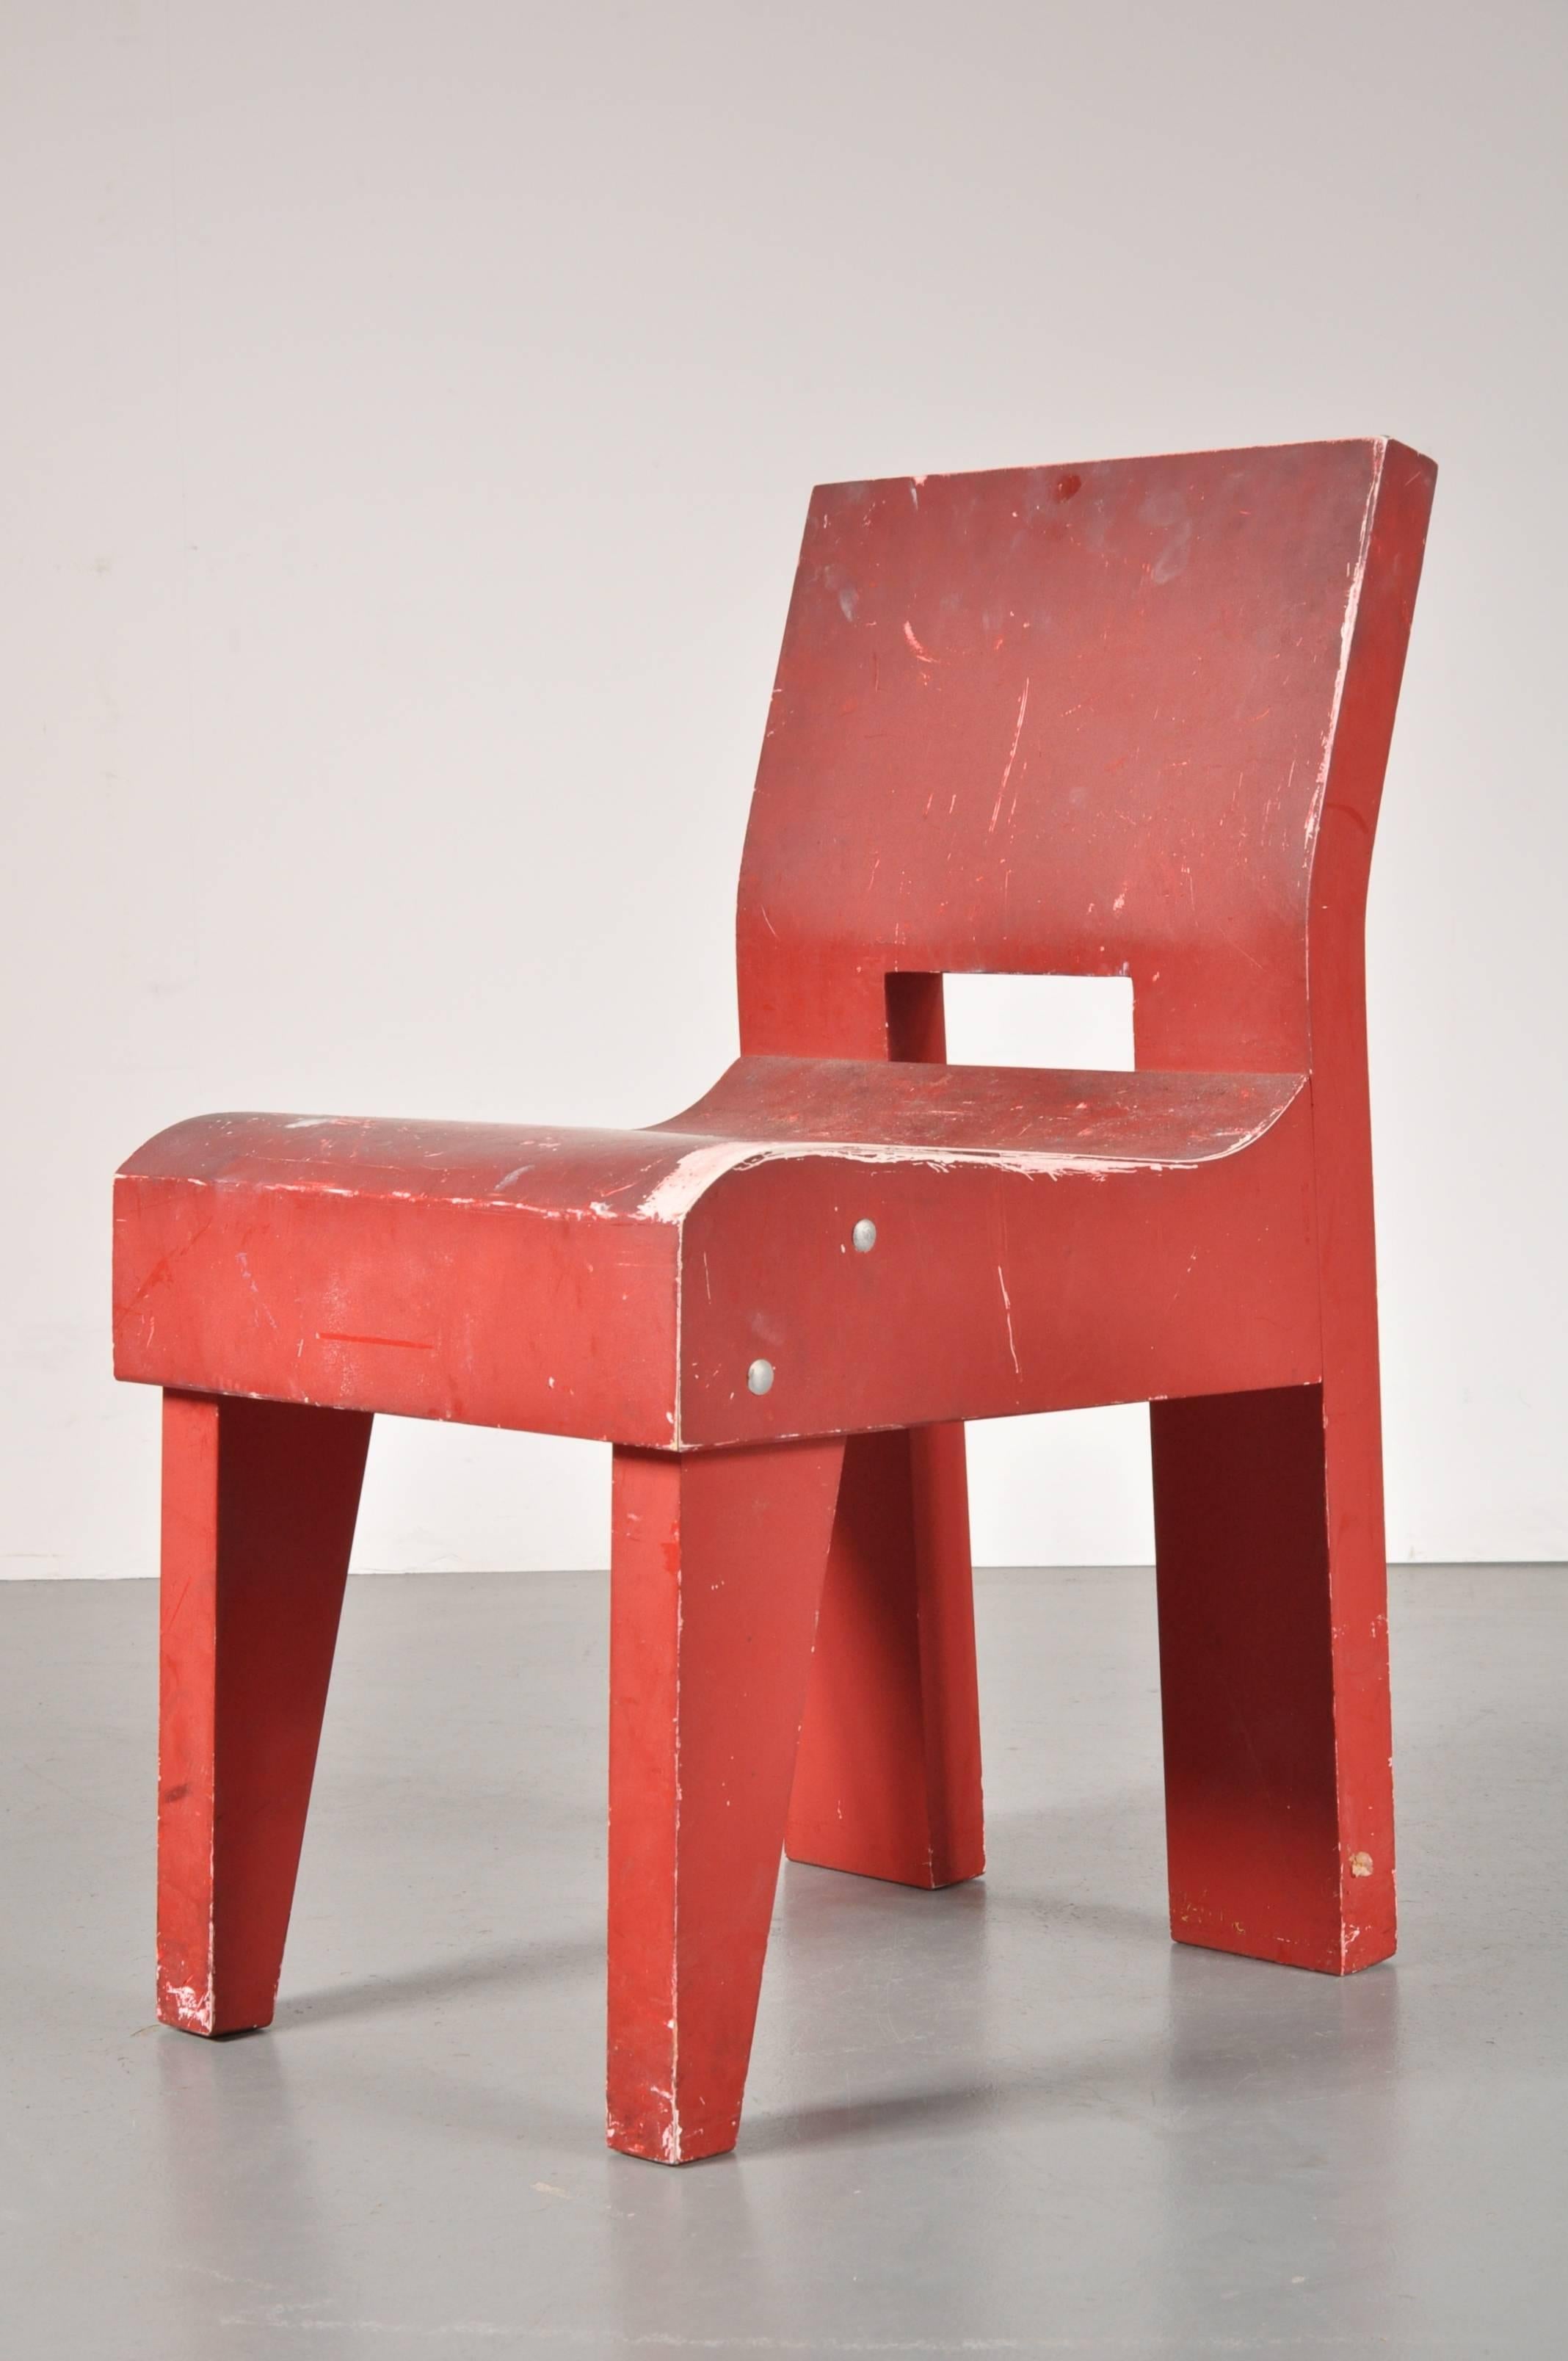 A very rare prototype of the SE20 chair, designed by Martin Visser for 't Spectrum, the Netherlands (Bergeijk) in 1988.

This beautiful chair is completely made of high quality red painted wood and a few chrome-plated metal joints. It's design is